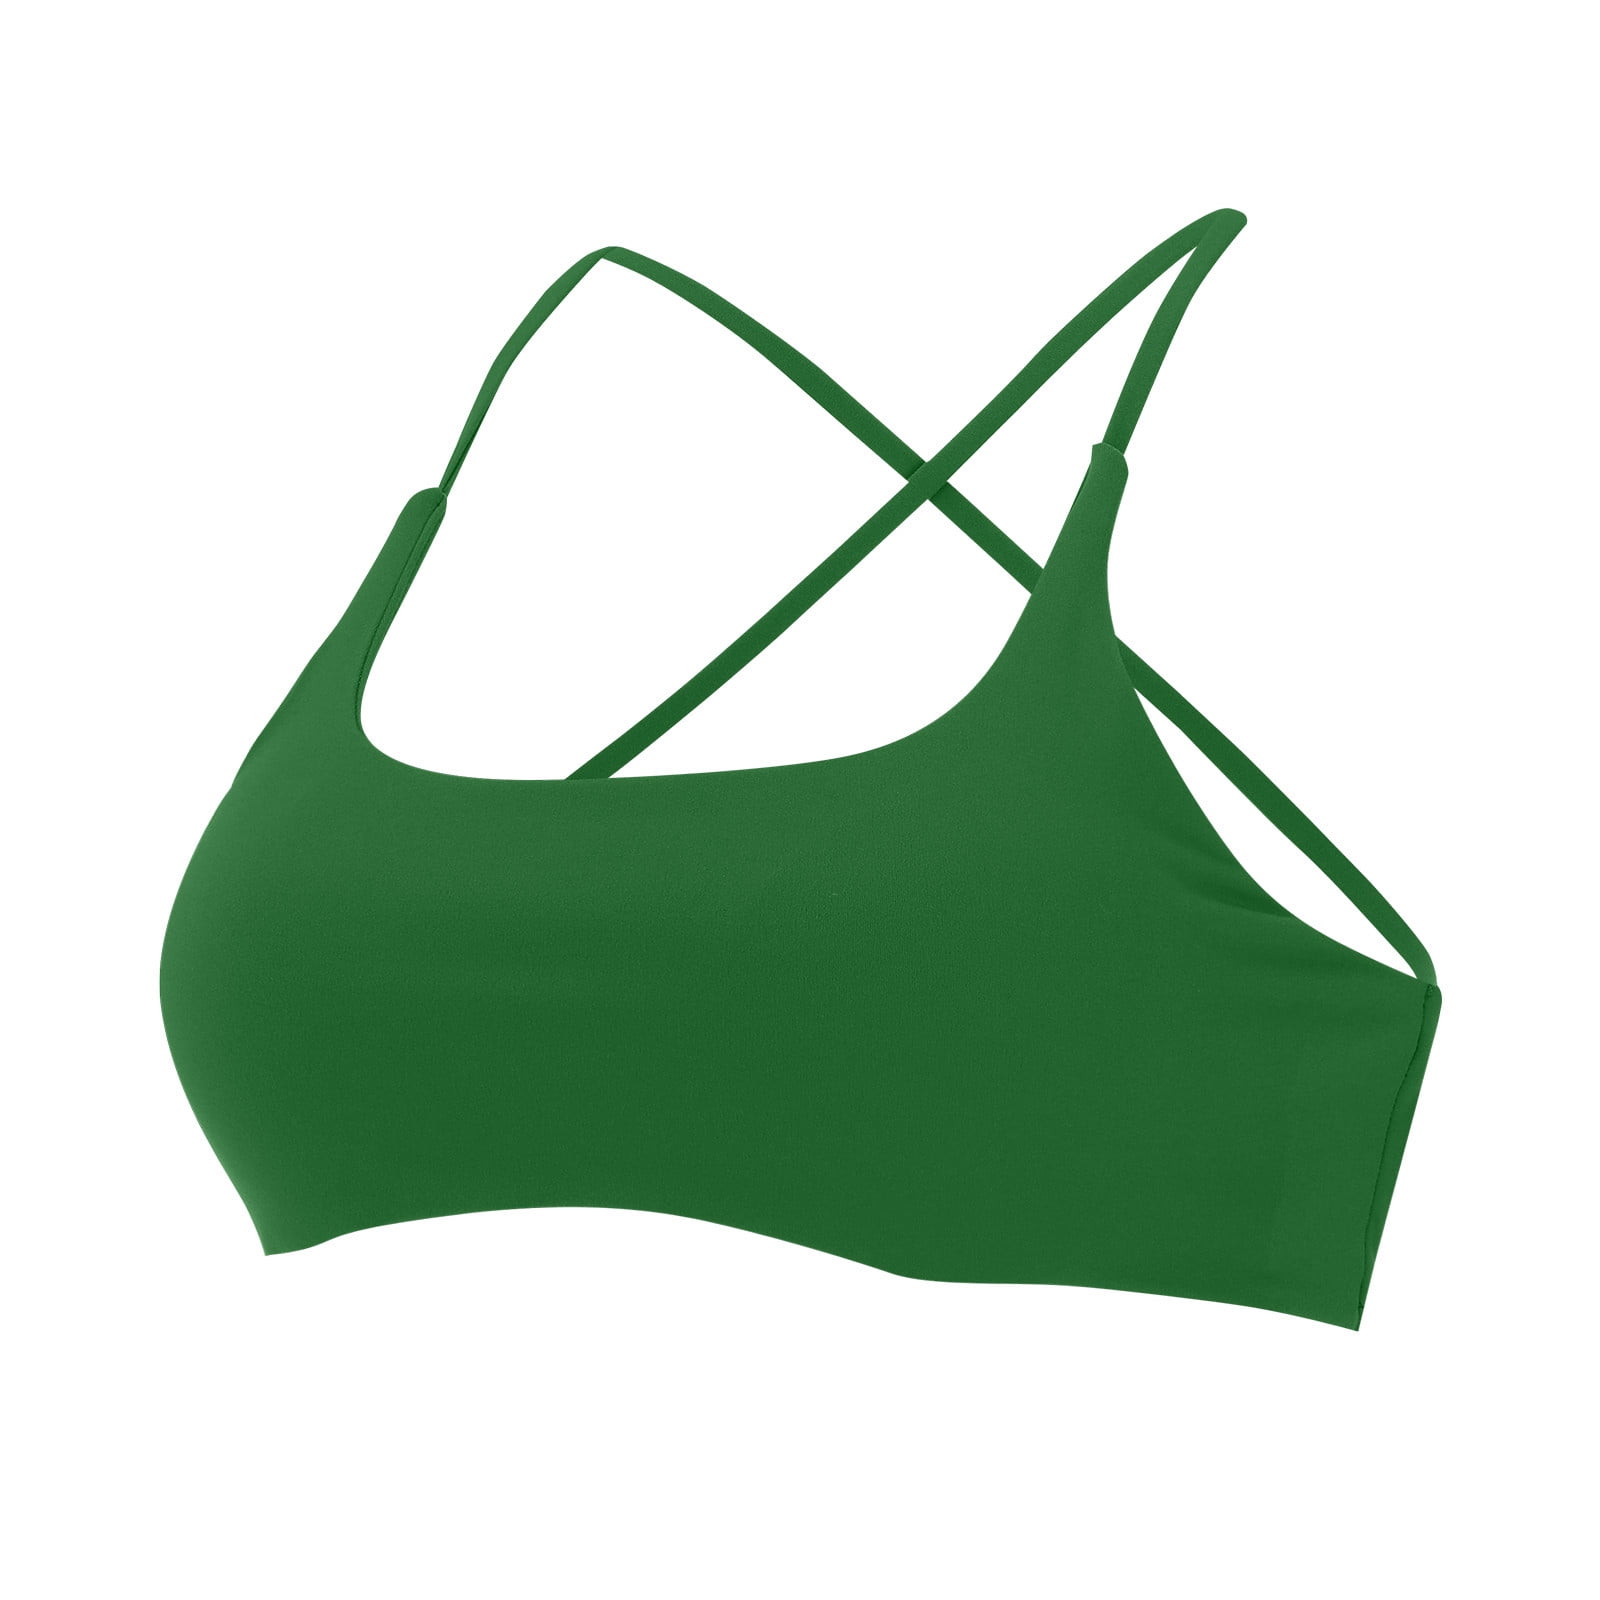 Sports Bra for Women with Sewn-in Pads, High Impact Support with